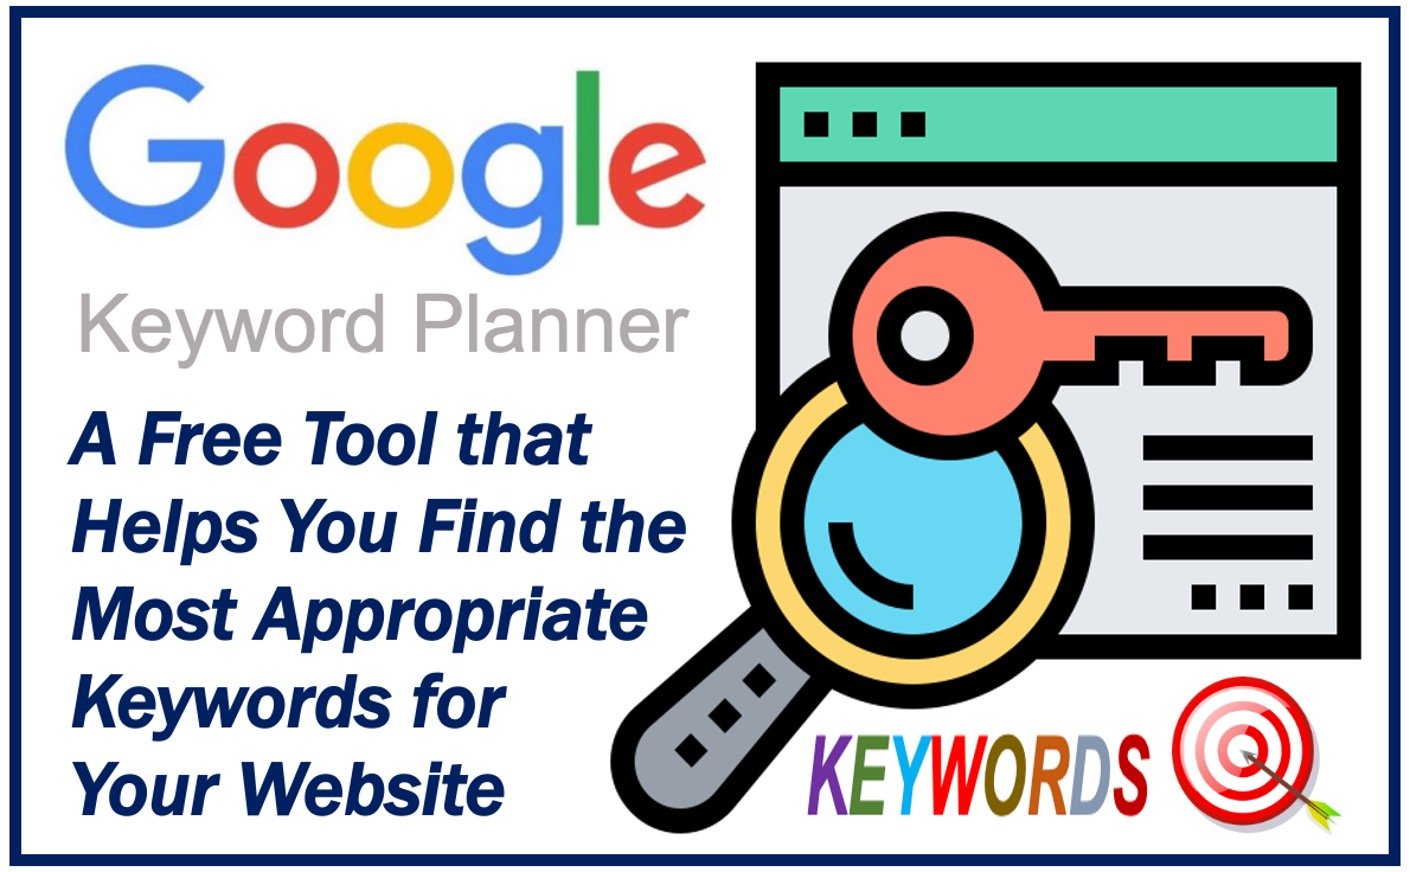 Why Should You Use Google Keyword Planner For Your Website